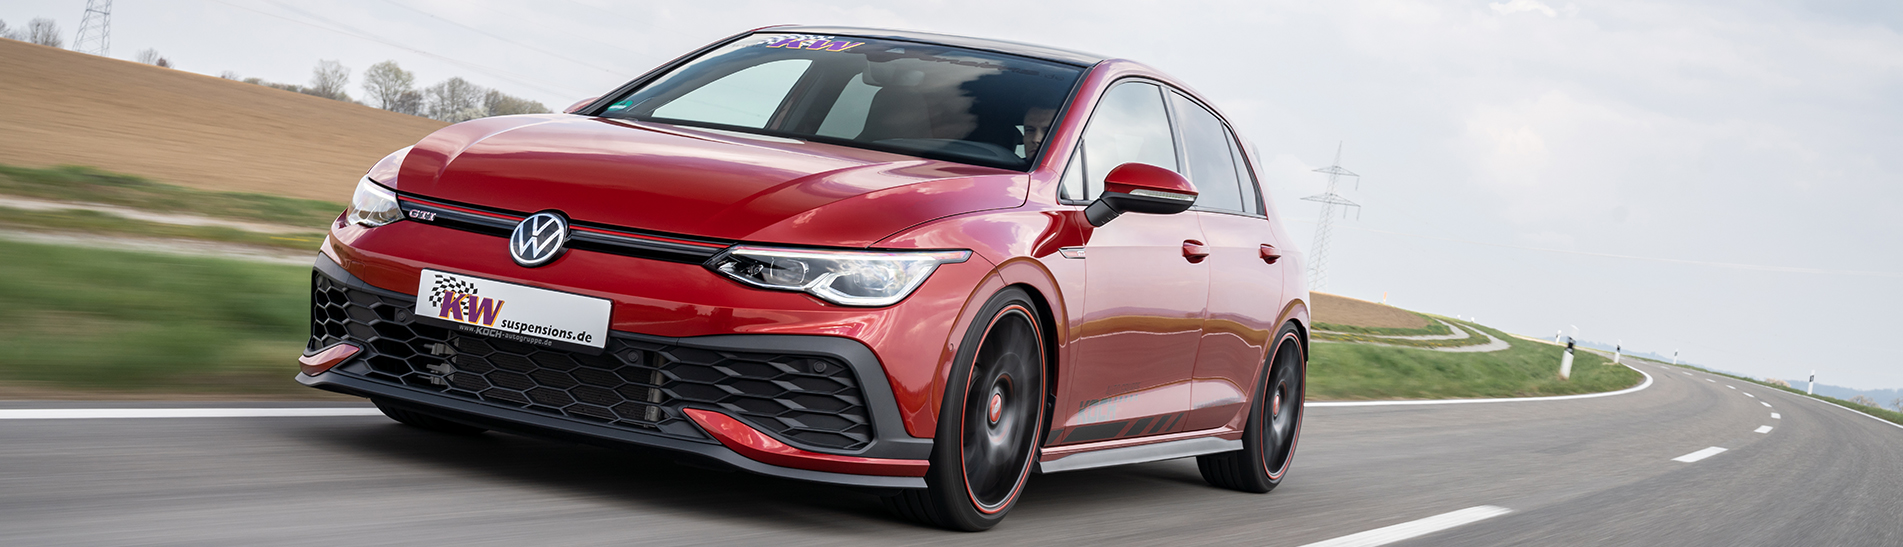 Maximum Stance and increased driving dynamics for the latest VW Golf GTI.